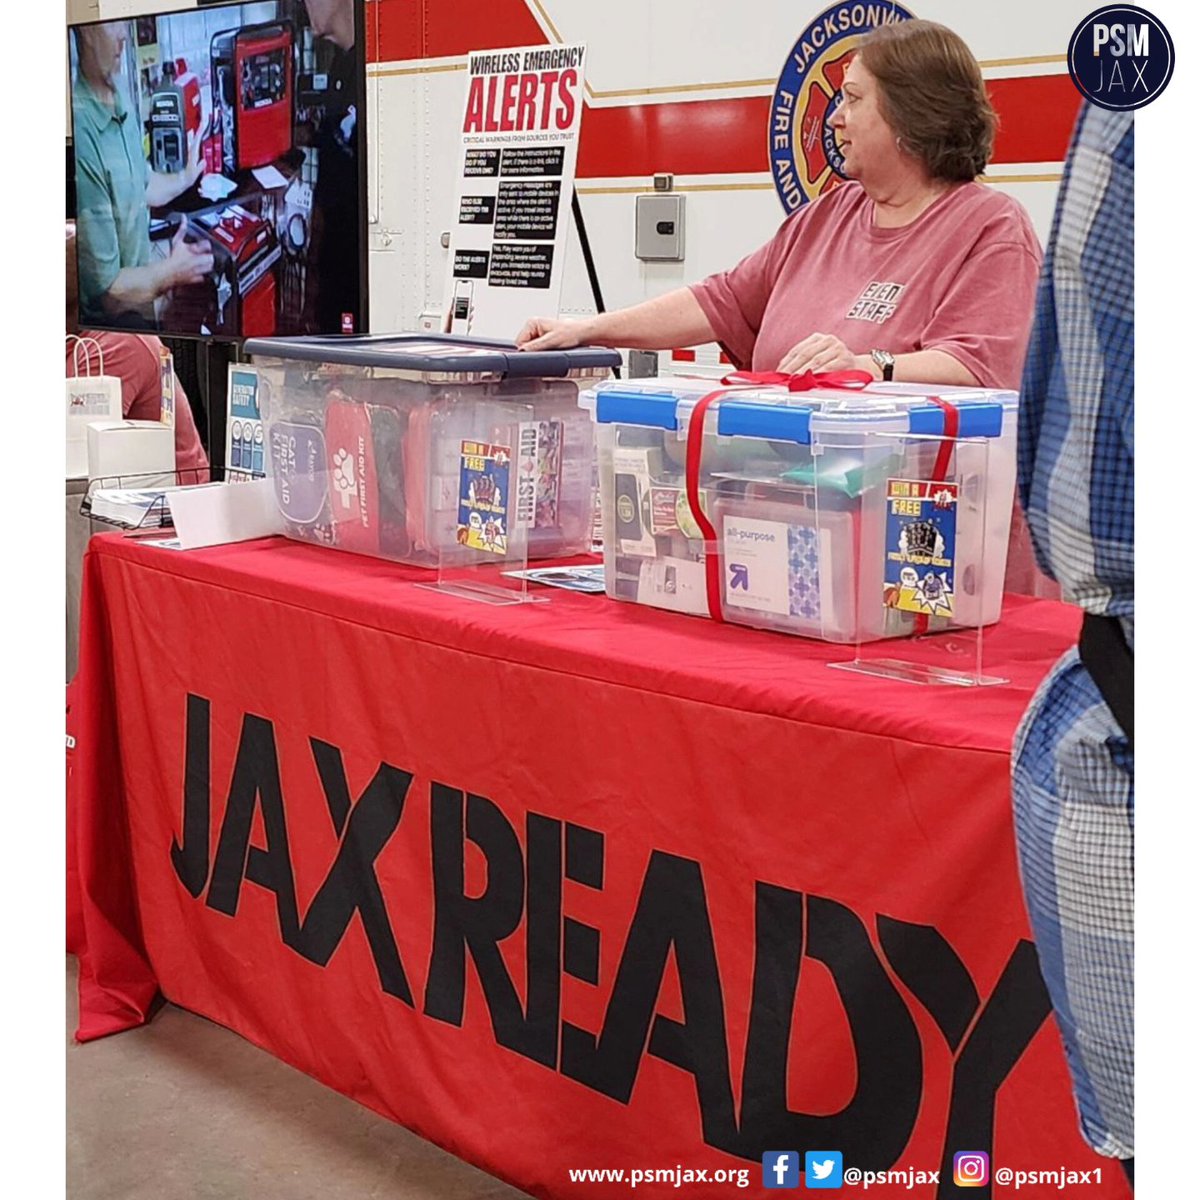 There's lots to do!!! If you missed today, be sure and bring the family tomorrow at the @JaxReady Fest. #PSMJax #JaxReadyFest #jacksonvilleflorida #Emergency #Preparedness